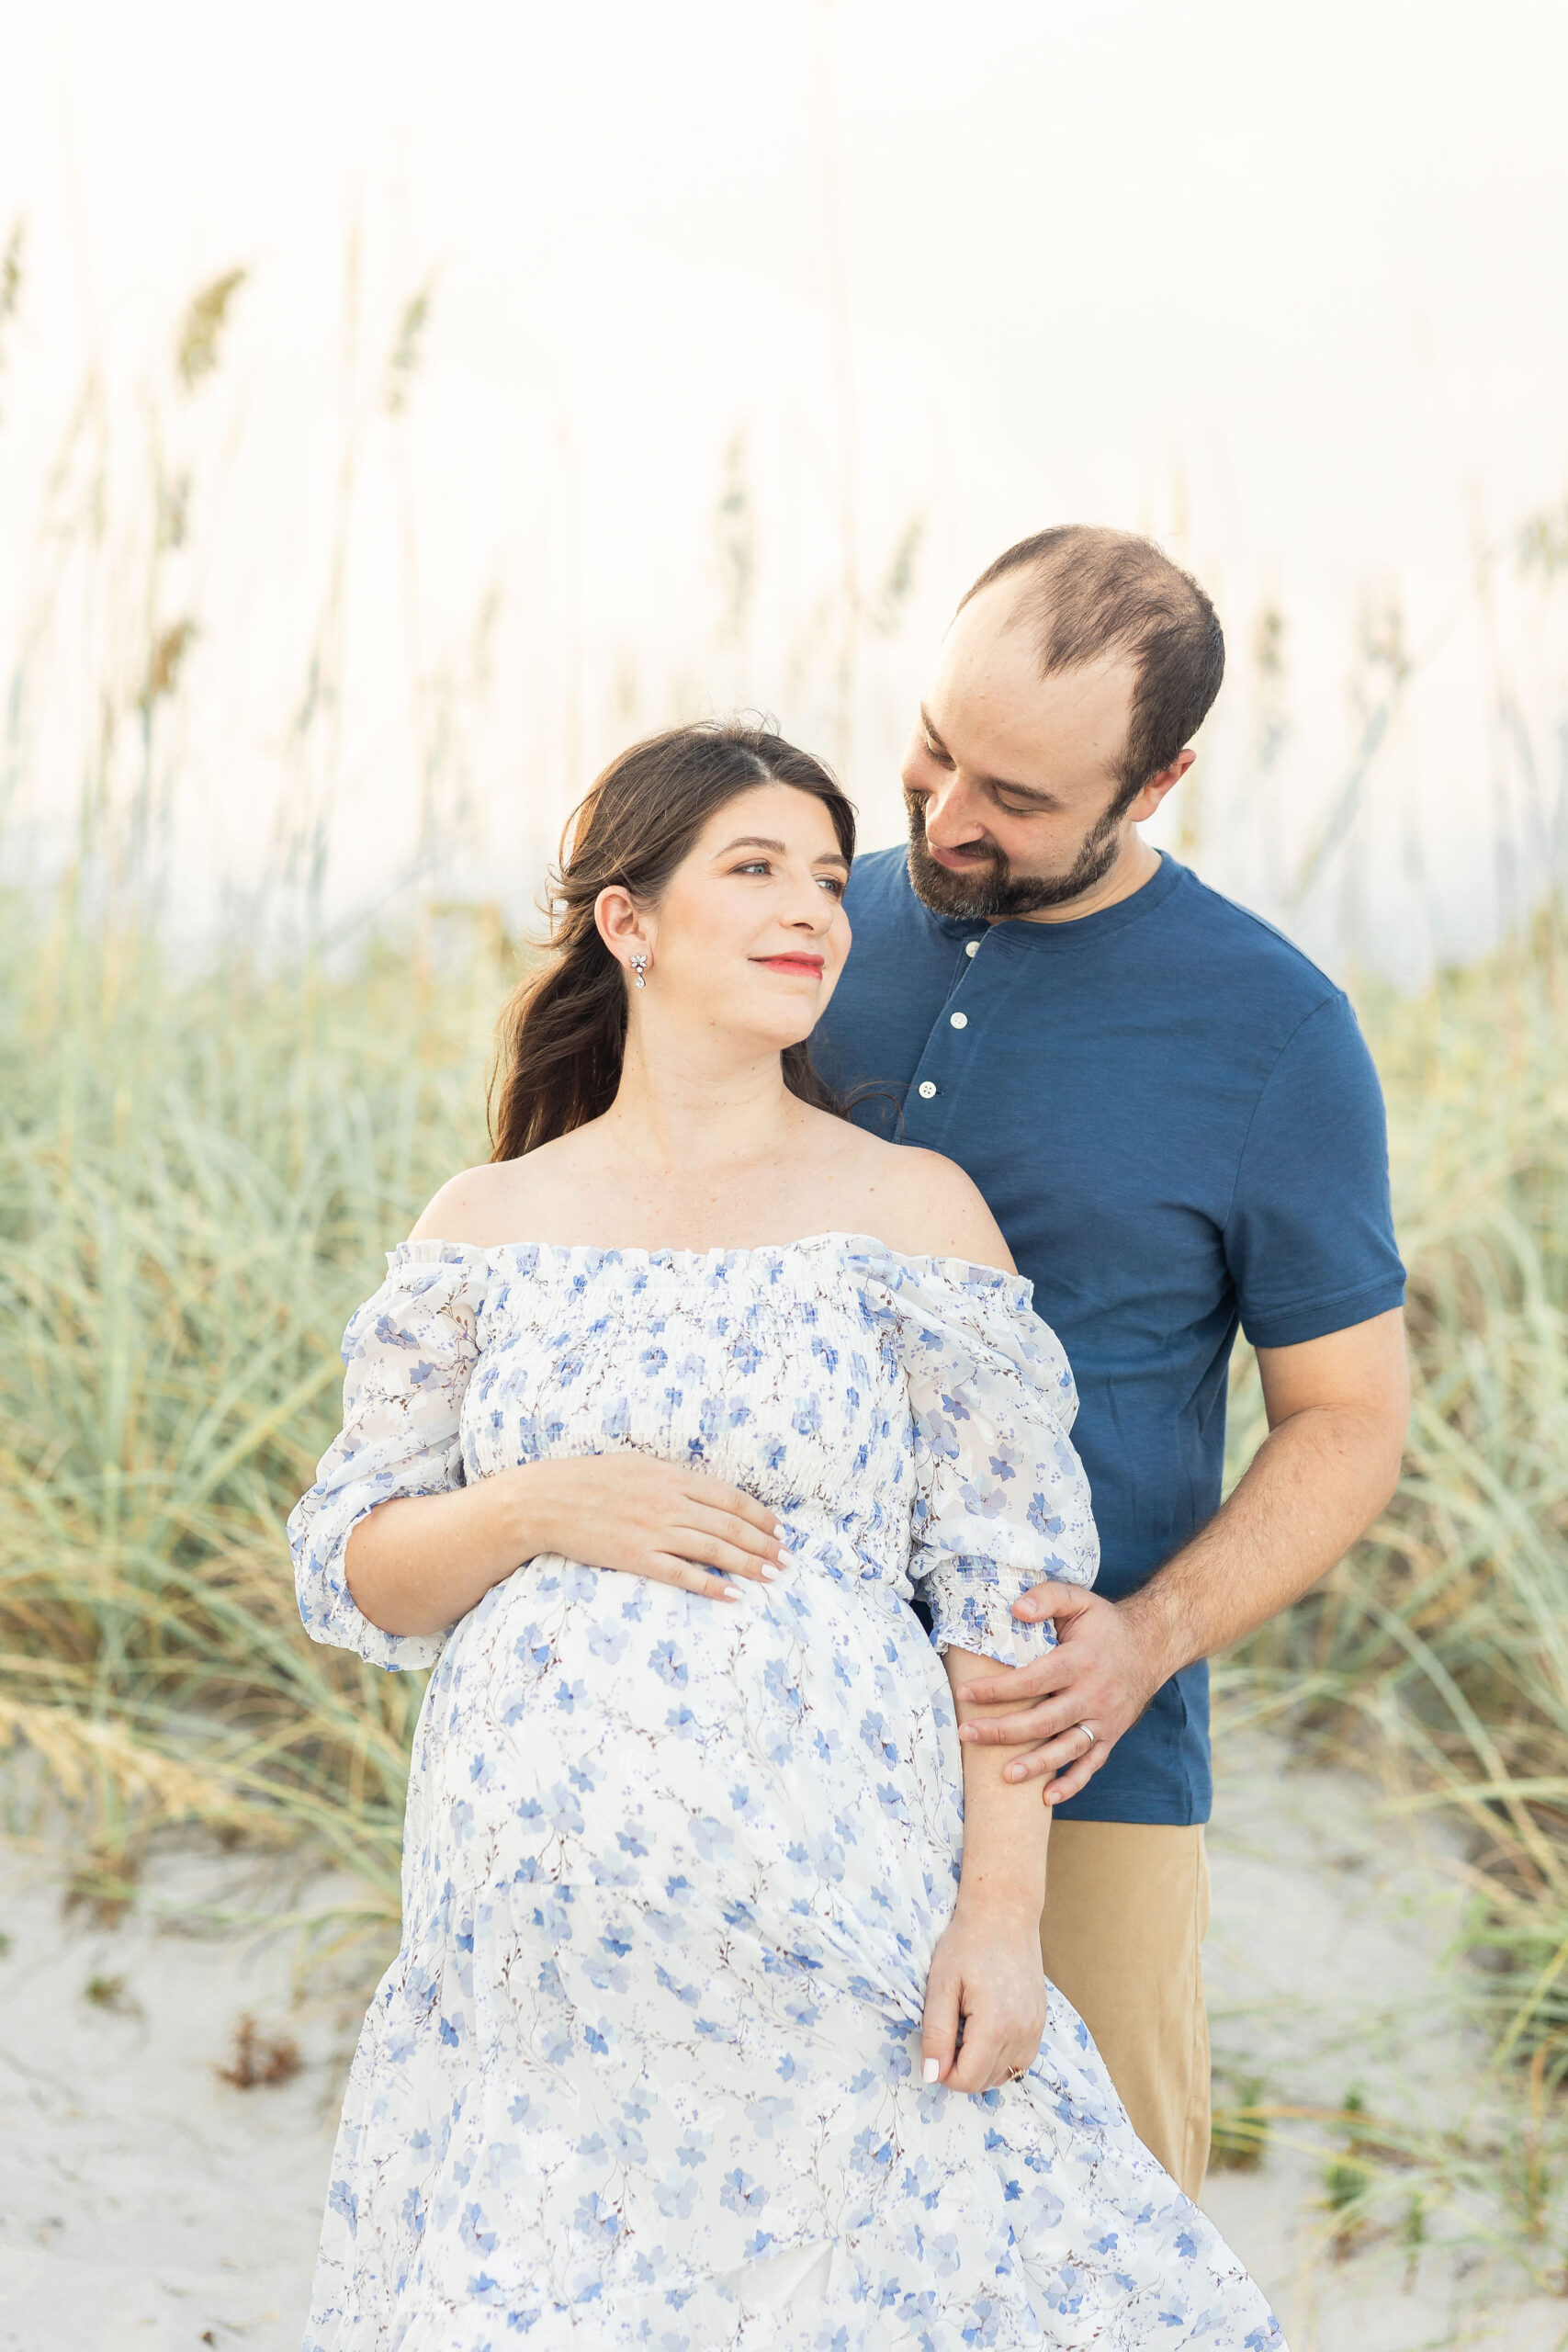 A mom to be in a blue floral dress rests her hand on her bump while looking over her shoulder to her husband behind her on a beach in the dunes